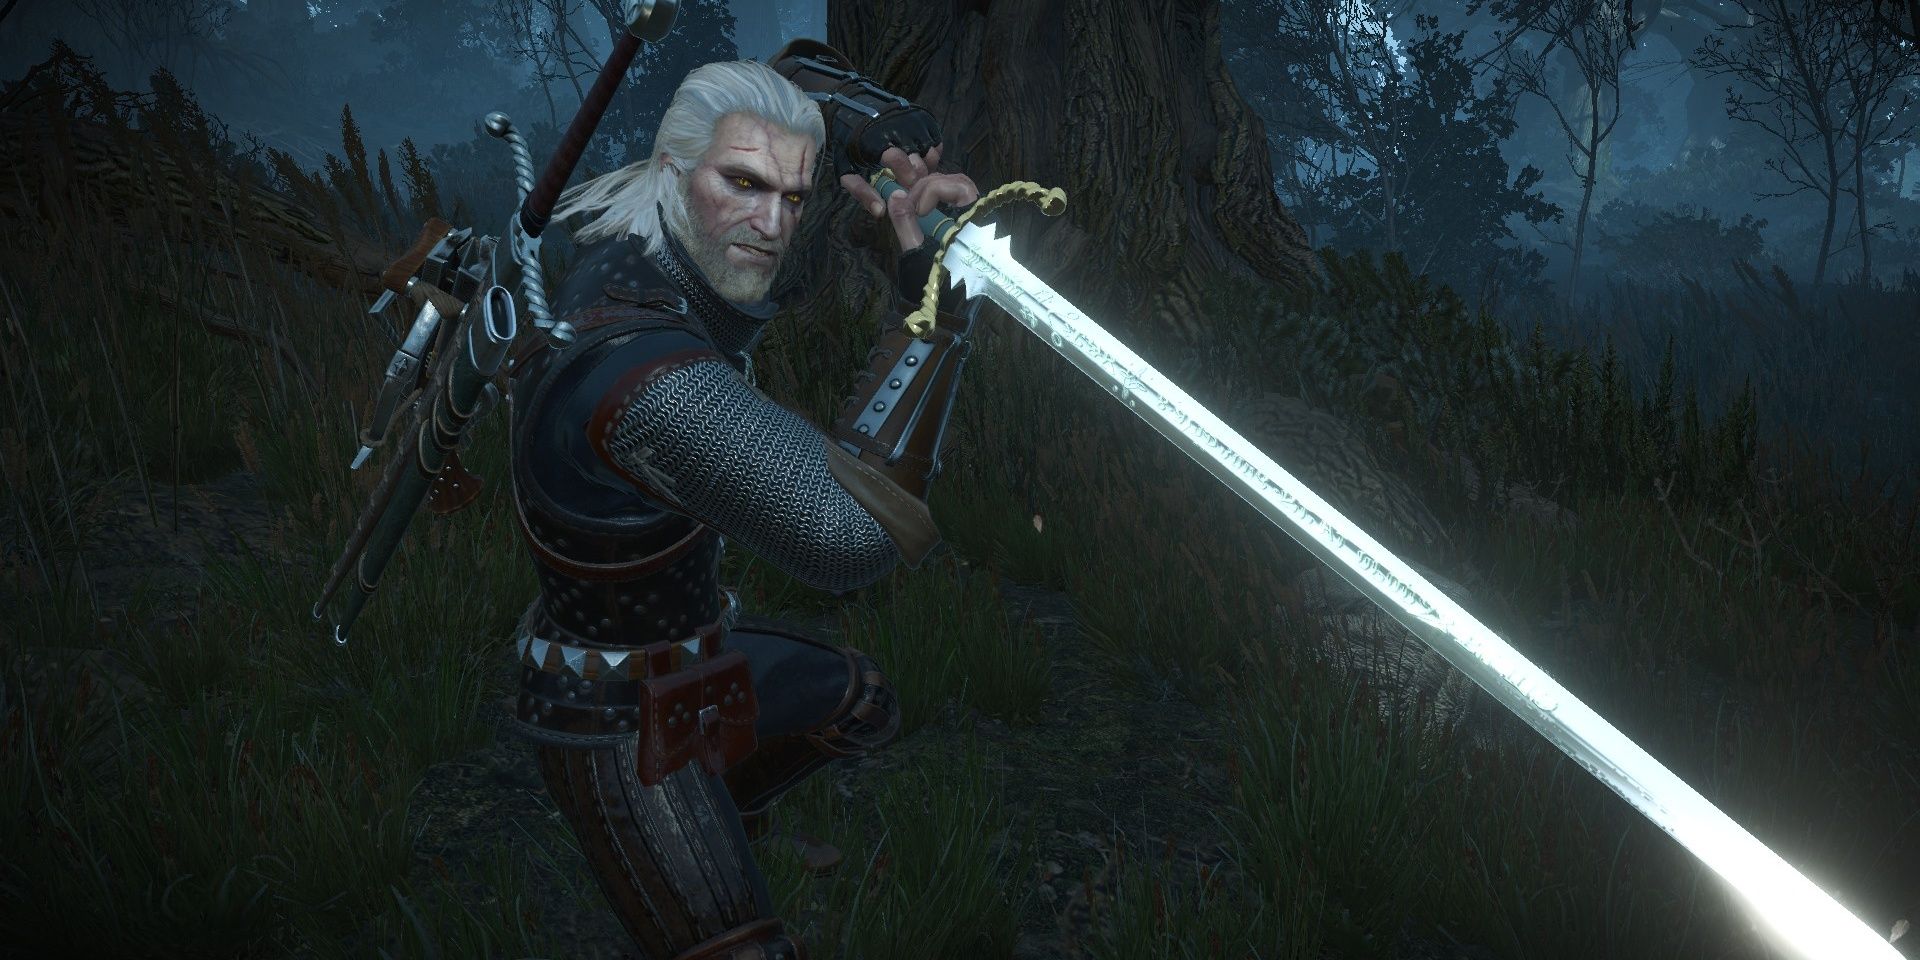 Belhaven Blade in The Witcher 3